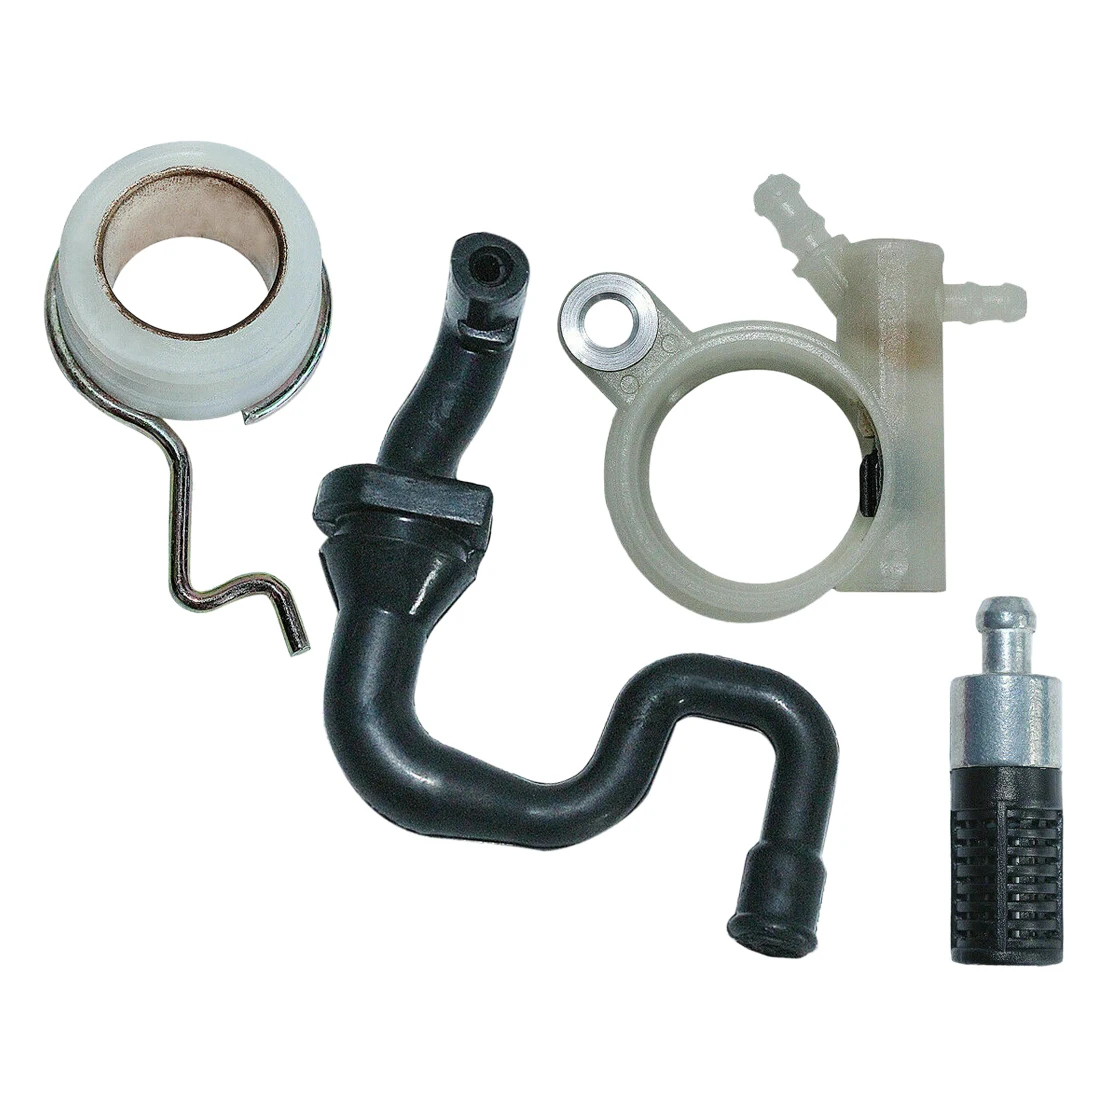 

11236407101 Oil Pump Filter Hose Line Worm Gear Kit 11436403201 Fit for Stihl MS251 MS231 MS231C MS251C Chainsaw